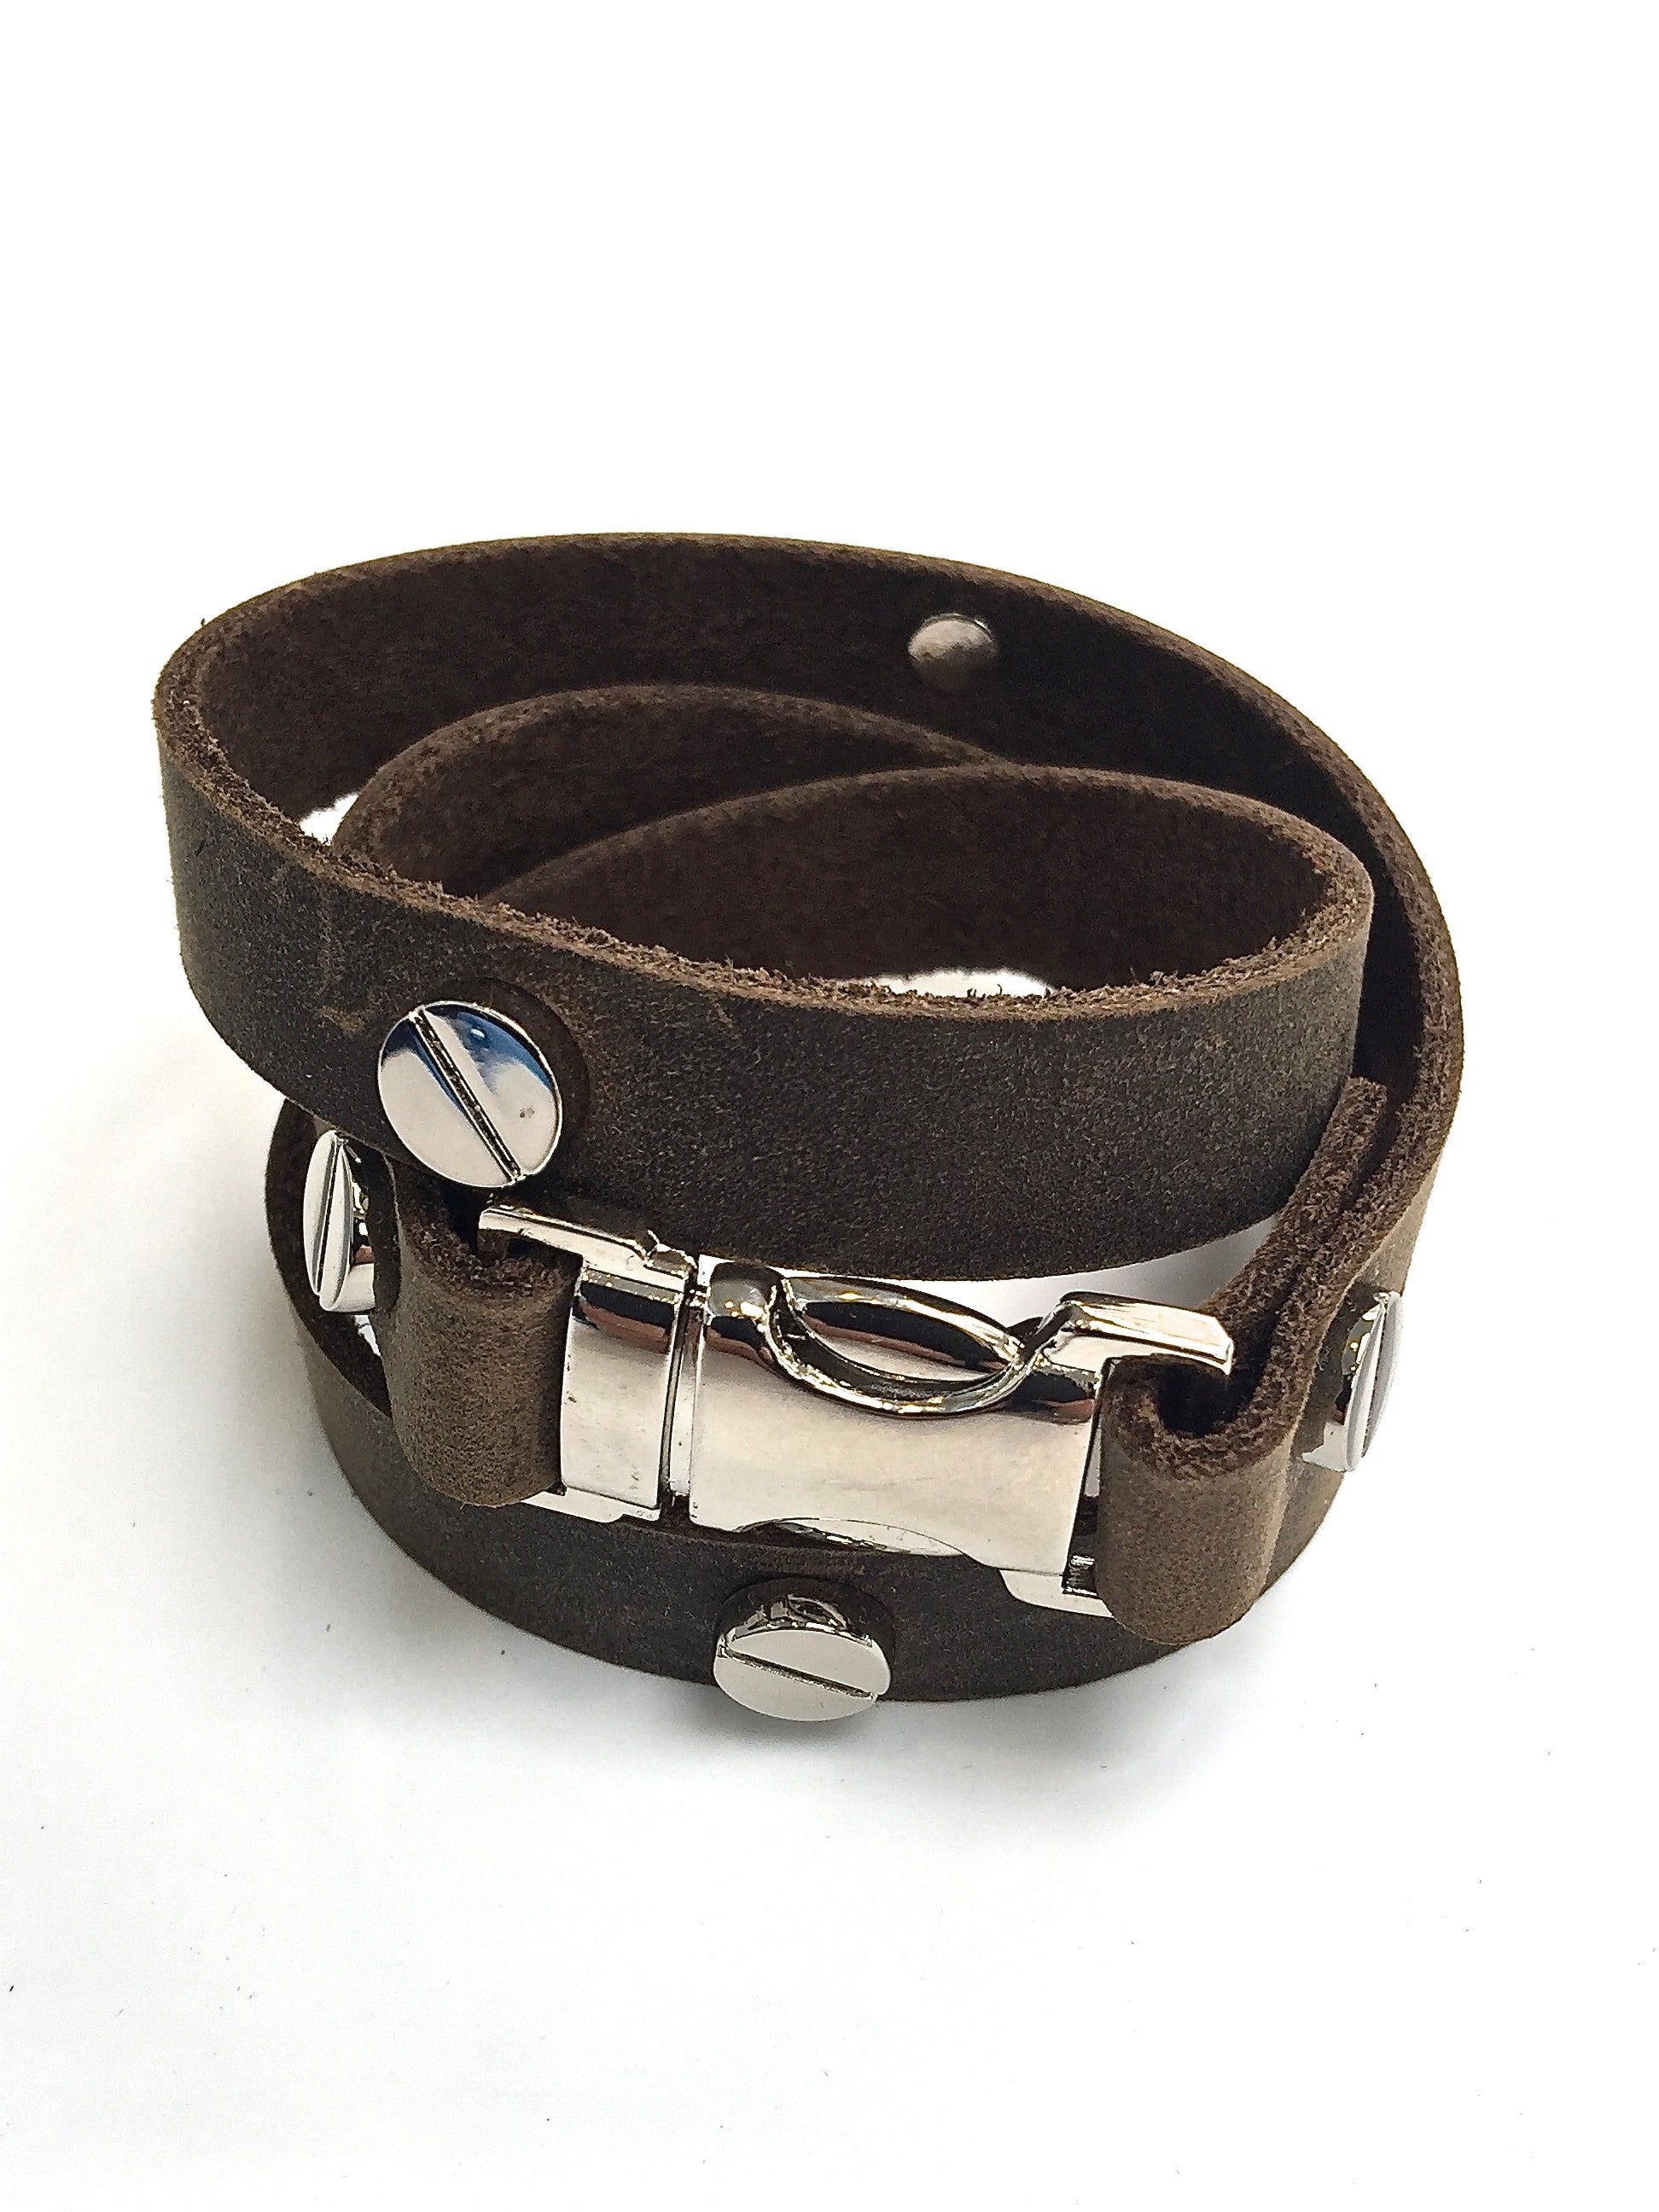 Quicksnap triple leather wraparound bracelet distressed utility by NYET jewelry leather